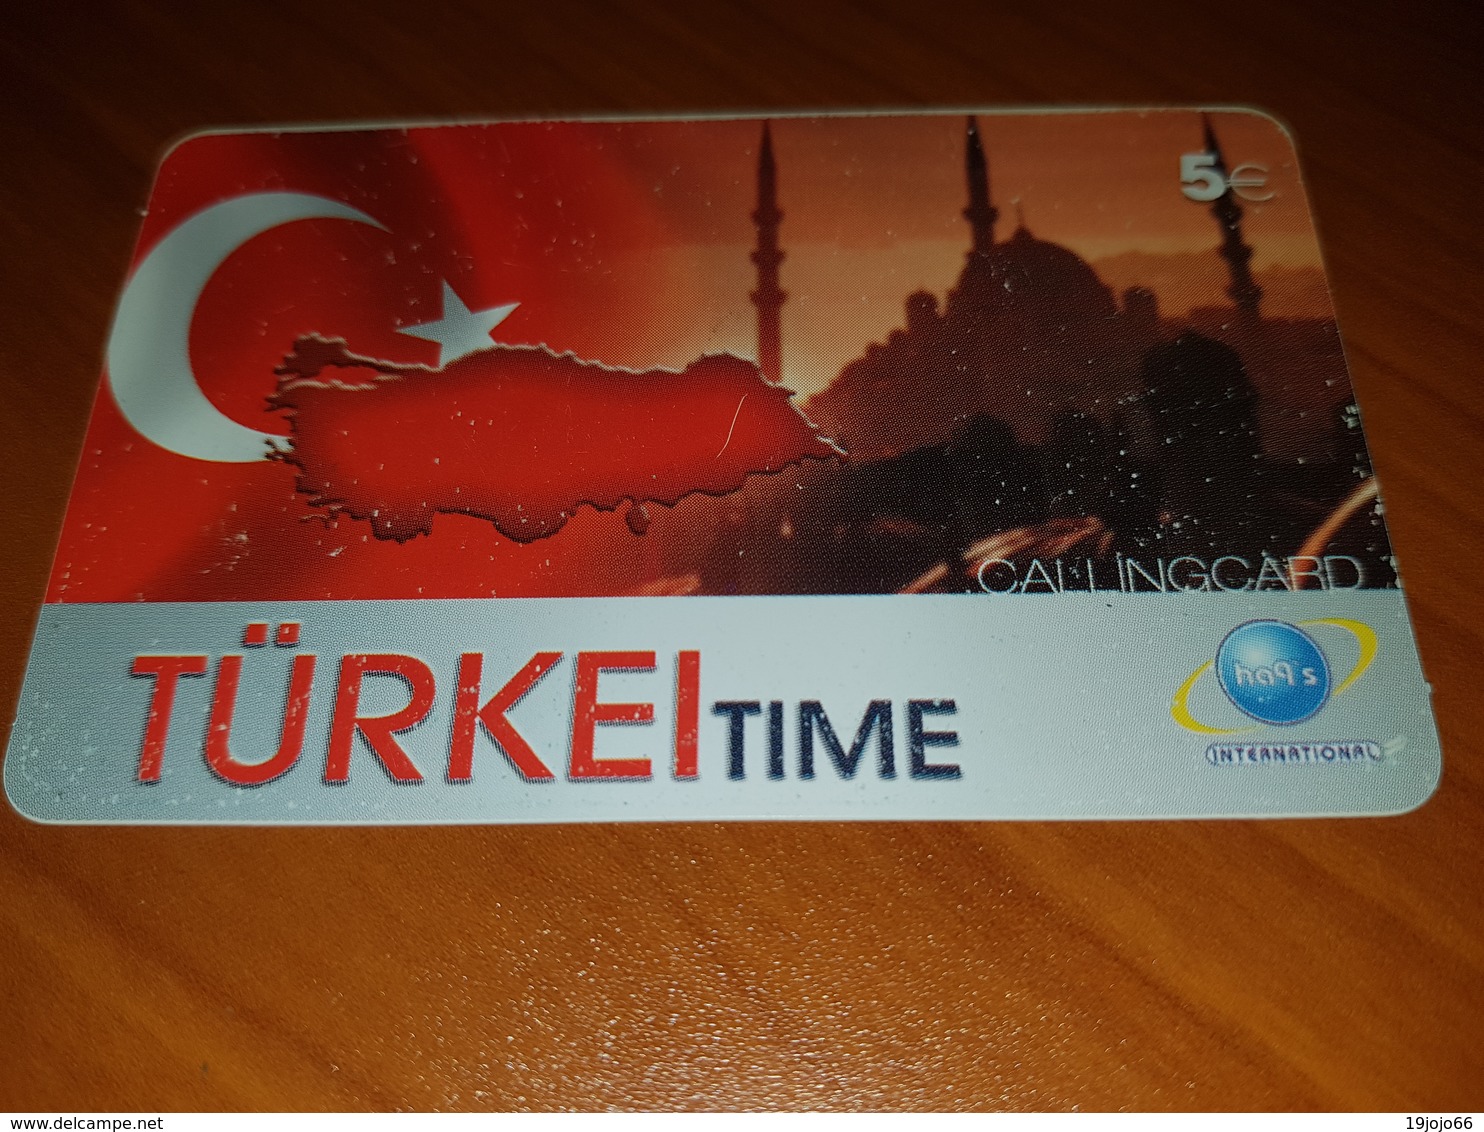 Türkei Time - Blue Moschee 5Euro  - Little Printed   -   Used Condition - [2] Prepaid